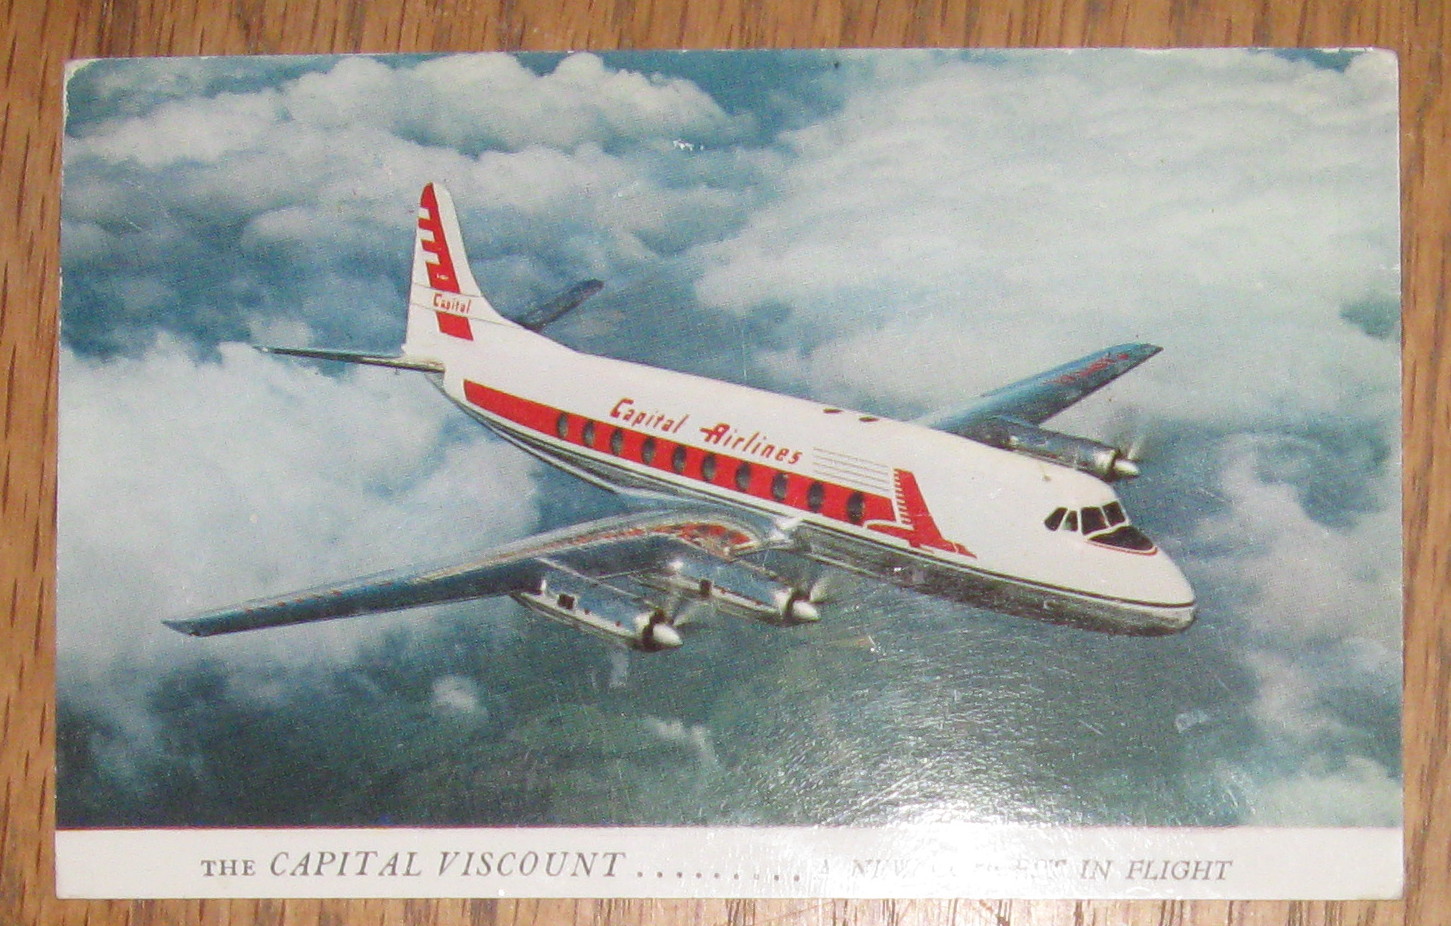 The Capital Viscount a new concept in flight